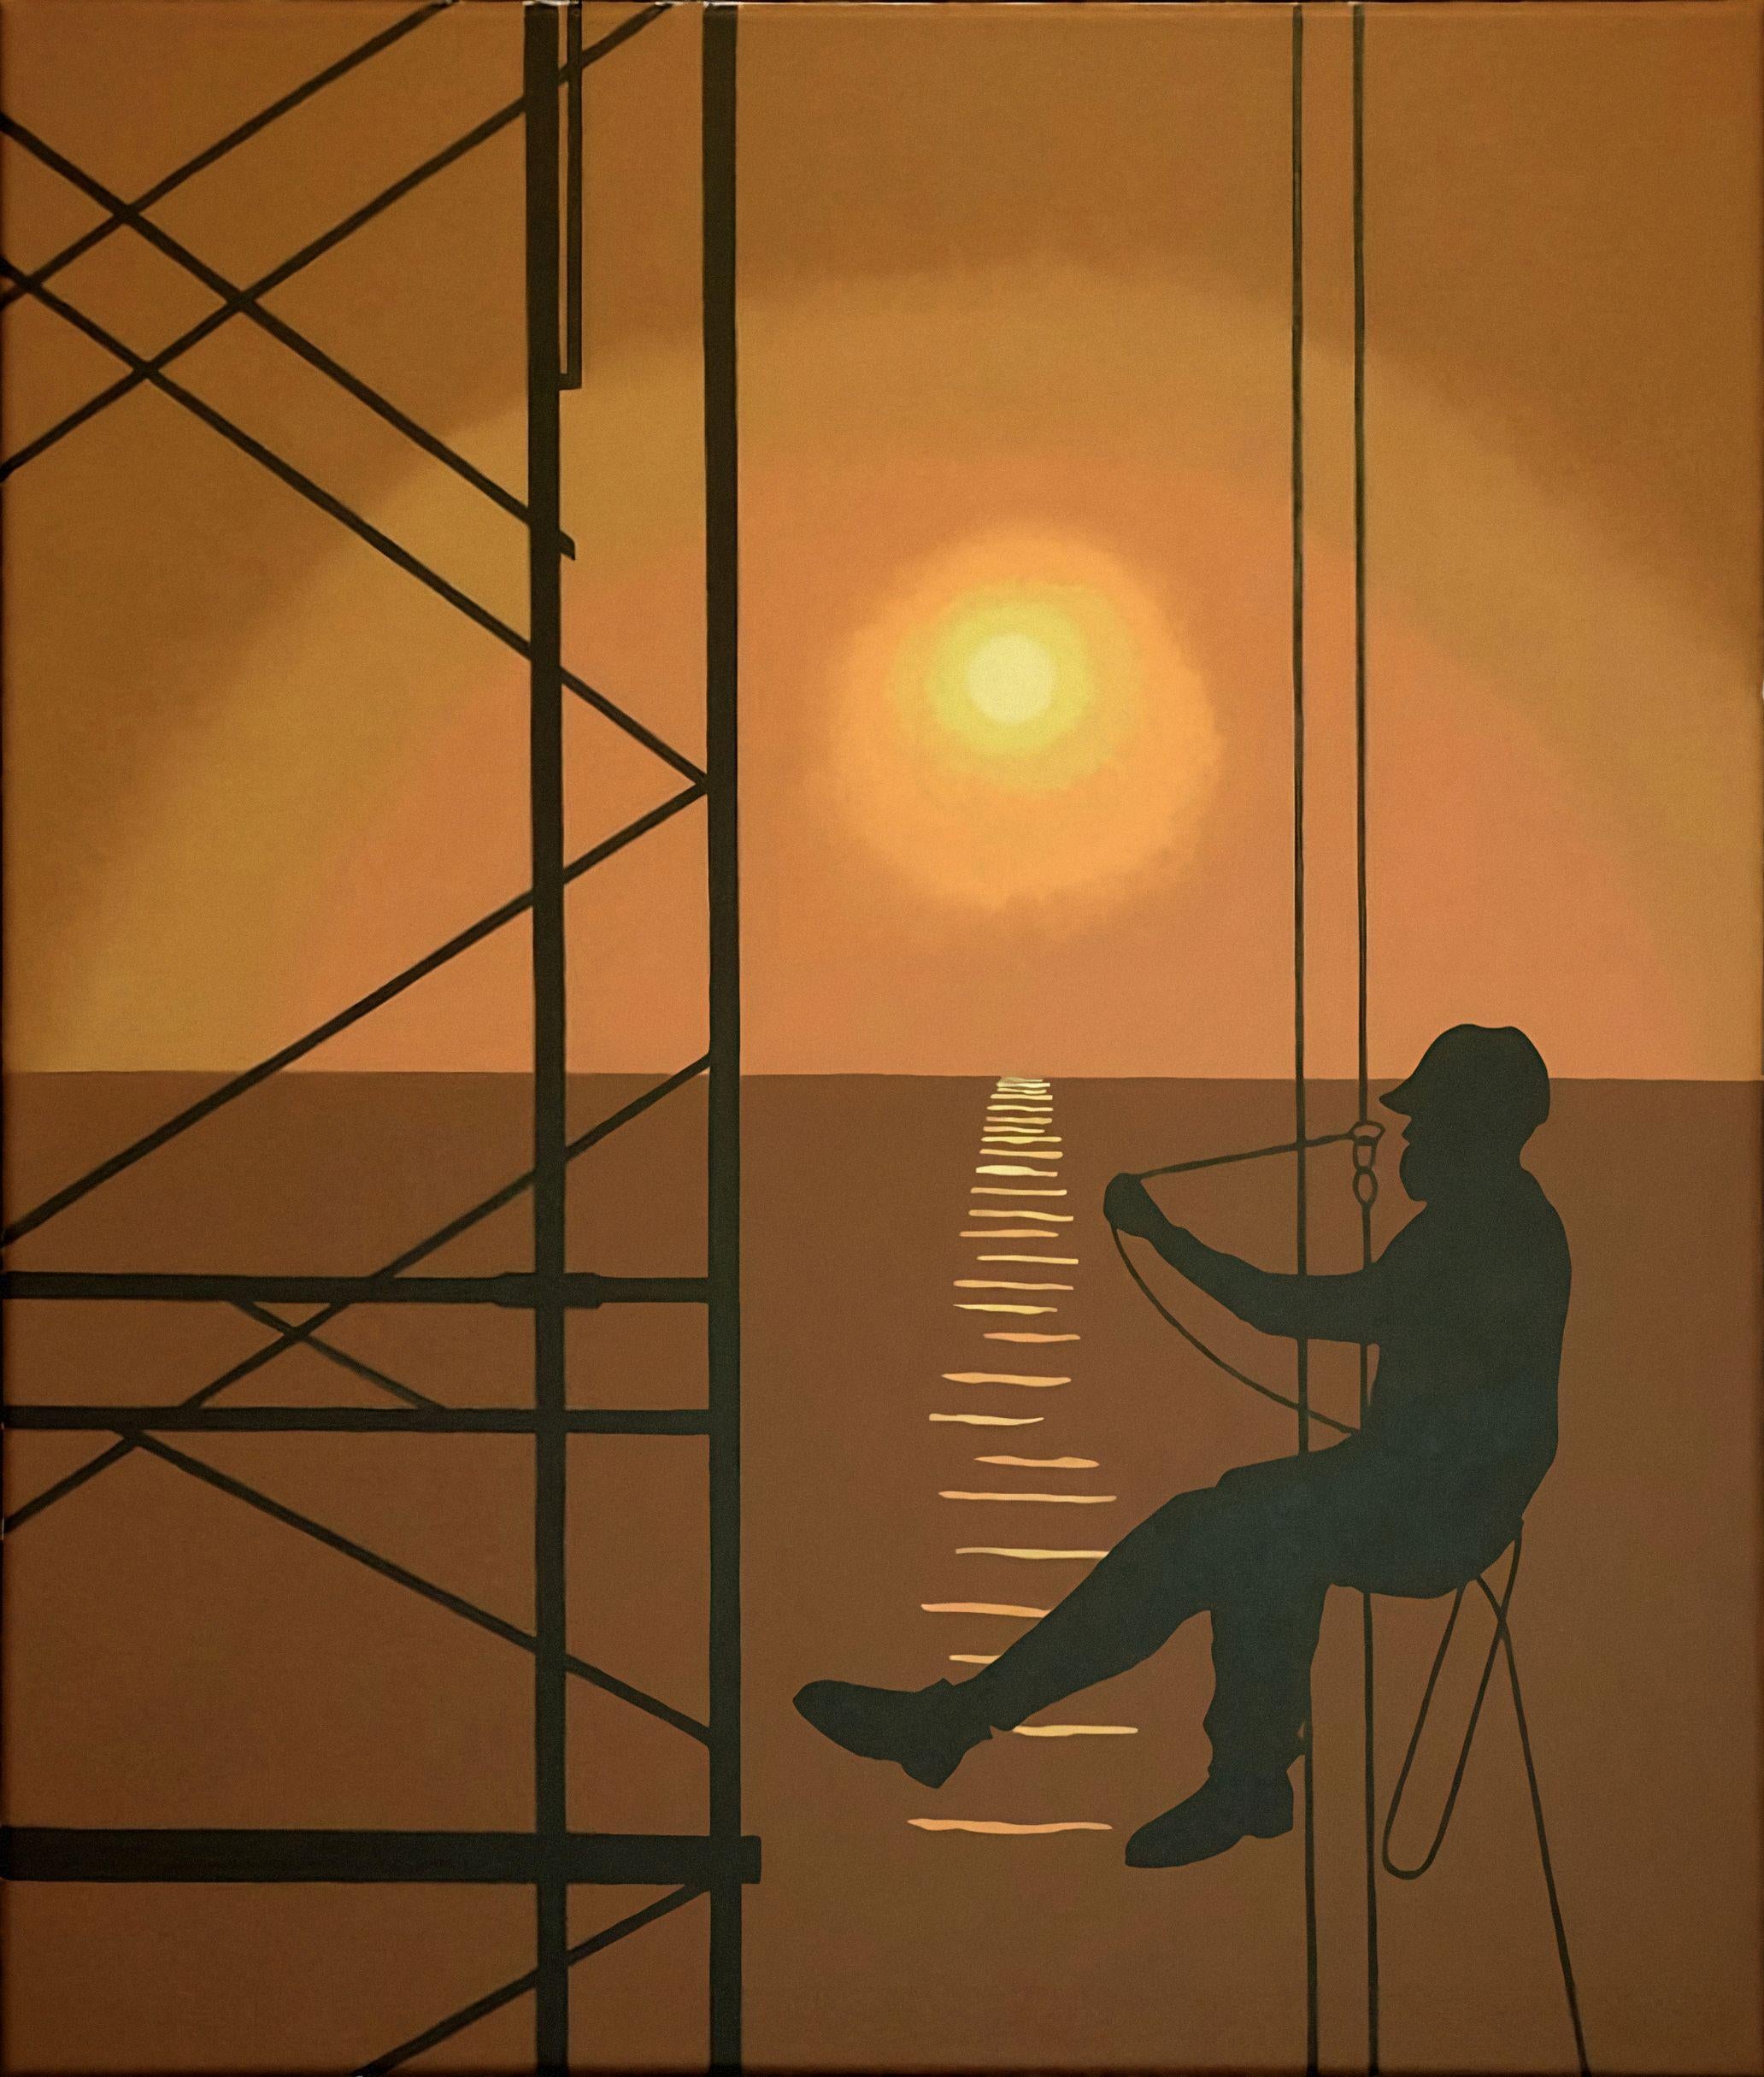 Hard-edge realism. Scaffolder in silhouette against a sunset. :: Painting :: Realism :: This piece comes with an official certificate of authenticity signed by the artist :: Ready to Hang: Yes :: Signed: No :: :: Canvas :: Diagonal :: Original ::